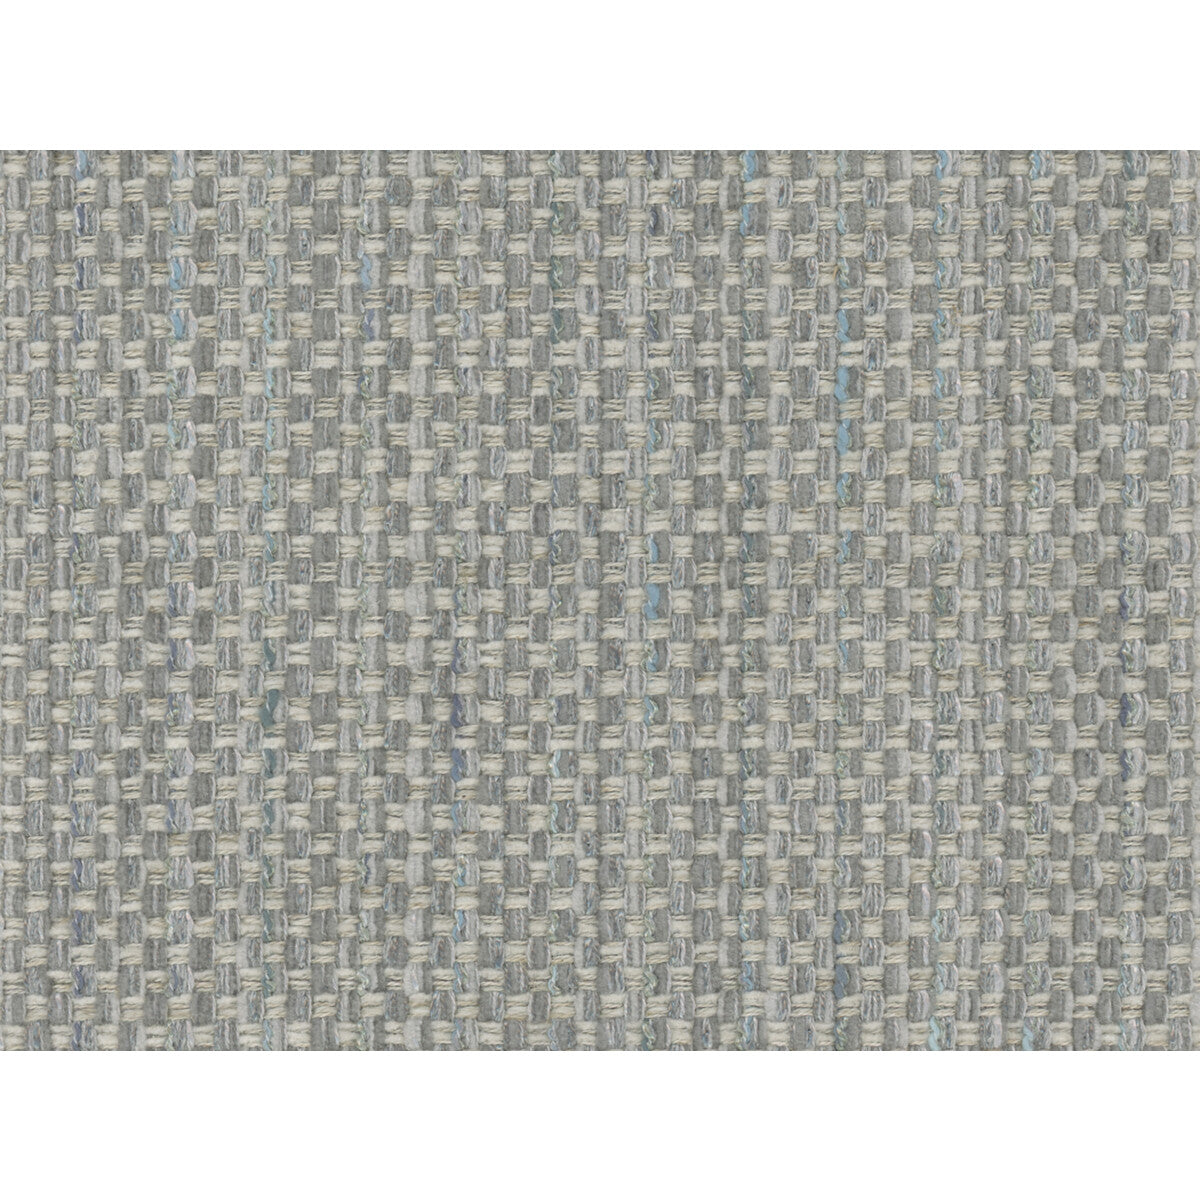 Tried And True fabric in chambray color - pattern 34464.1611.0 - by Kravet Couture